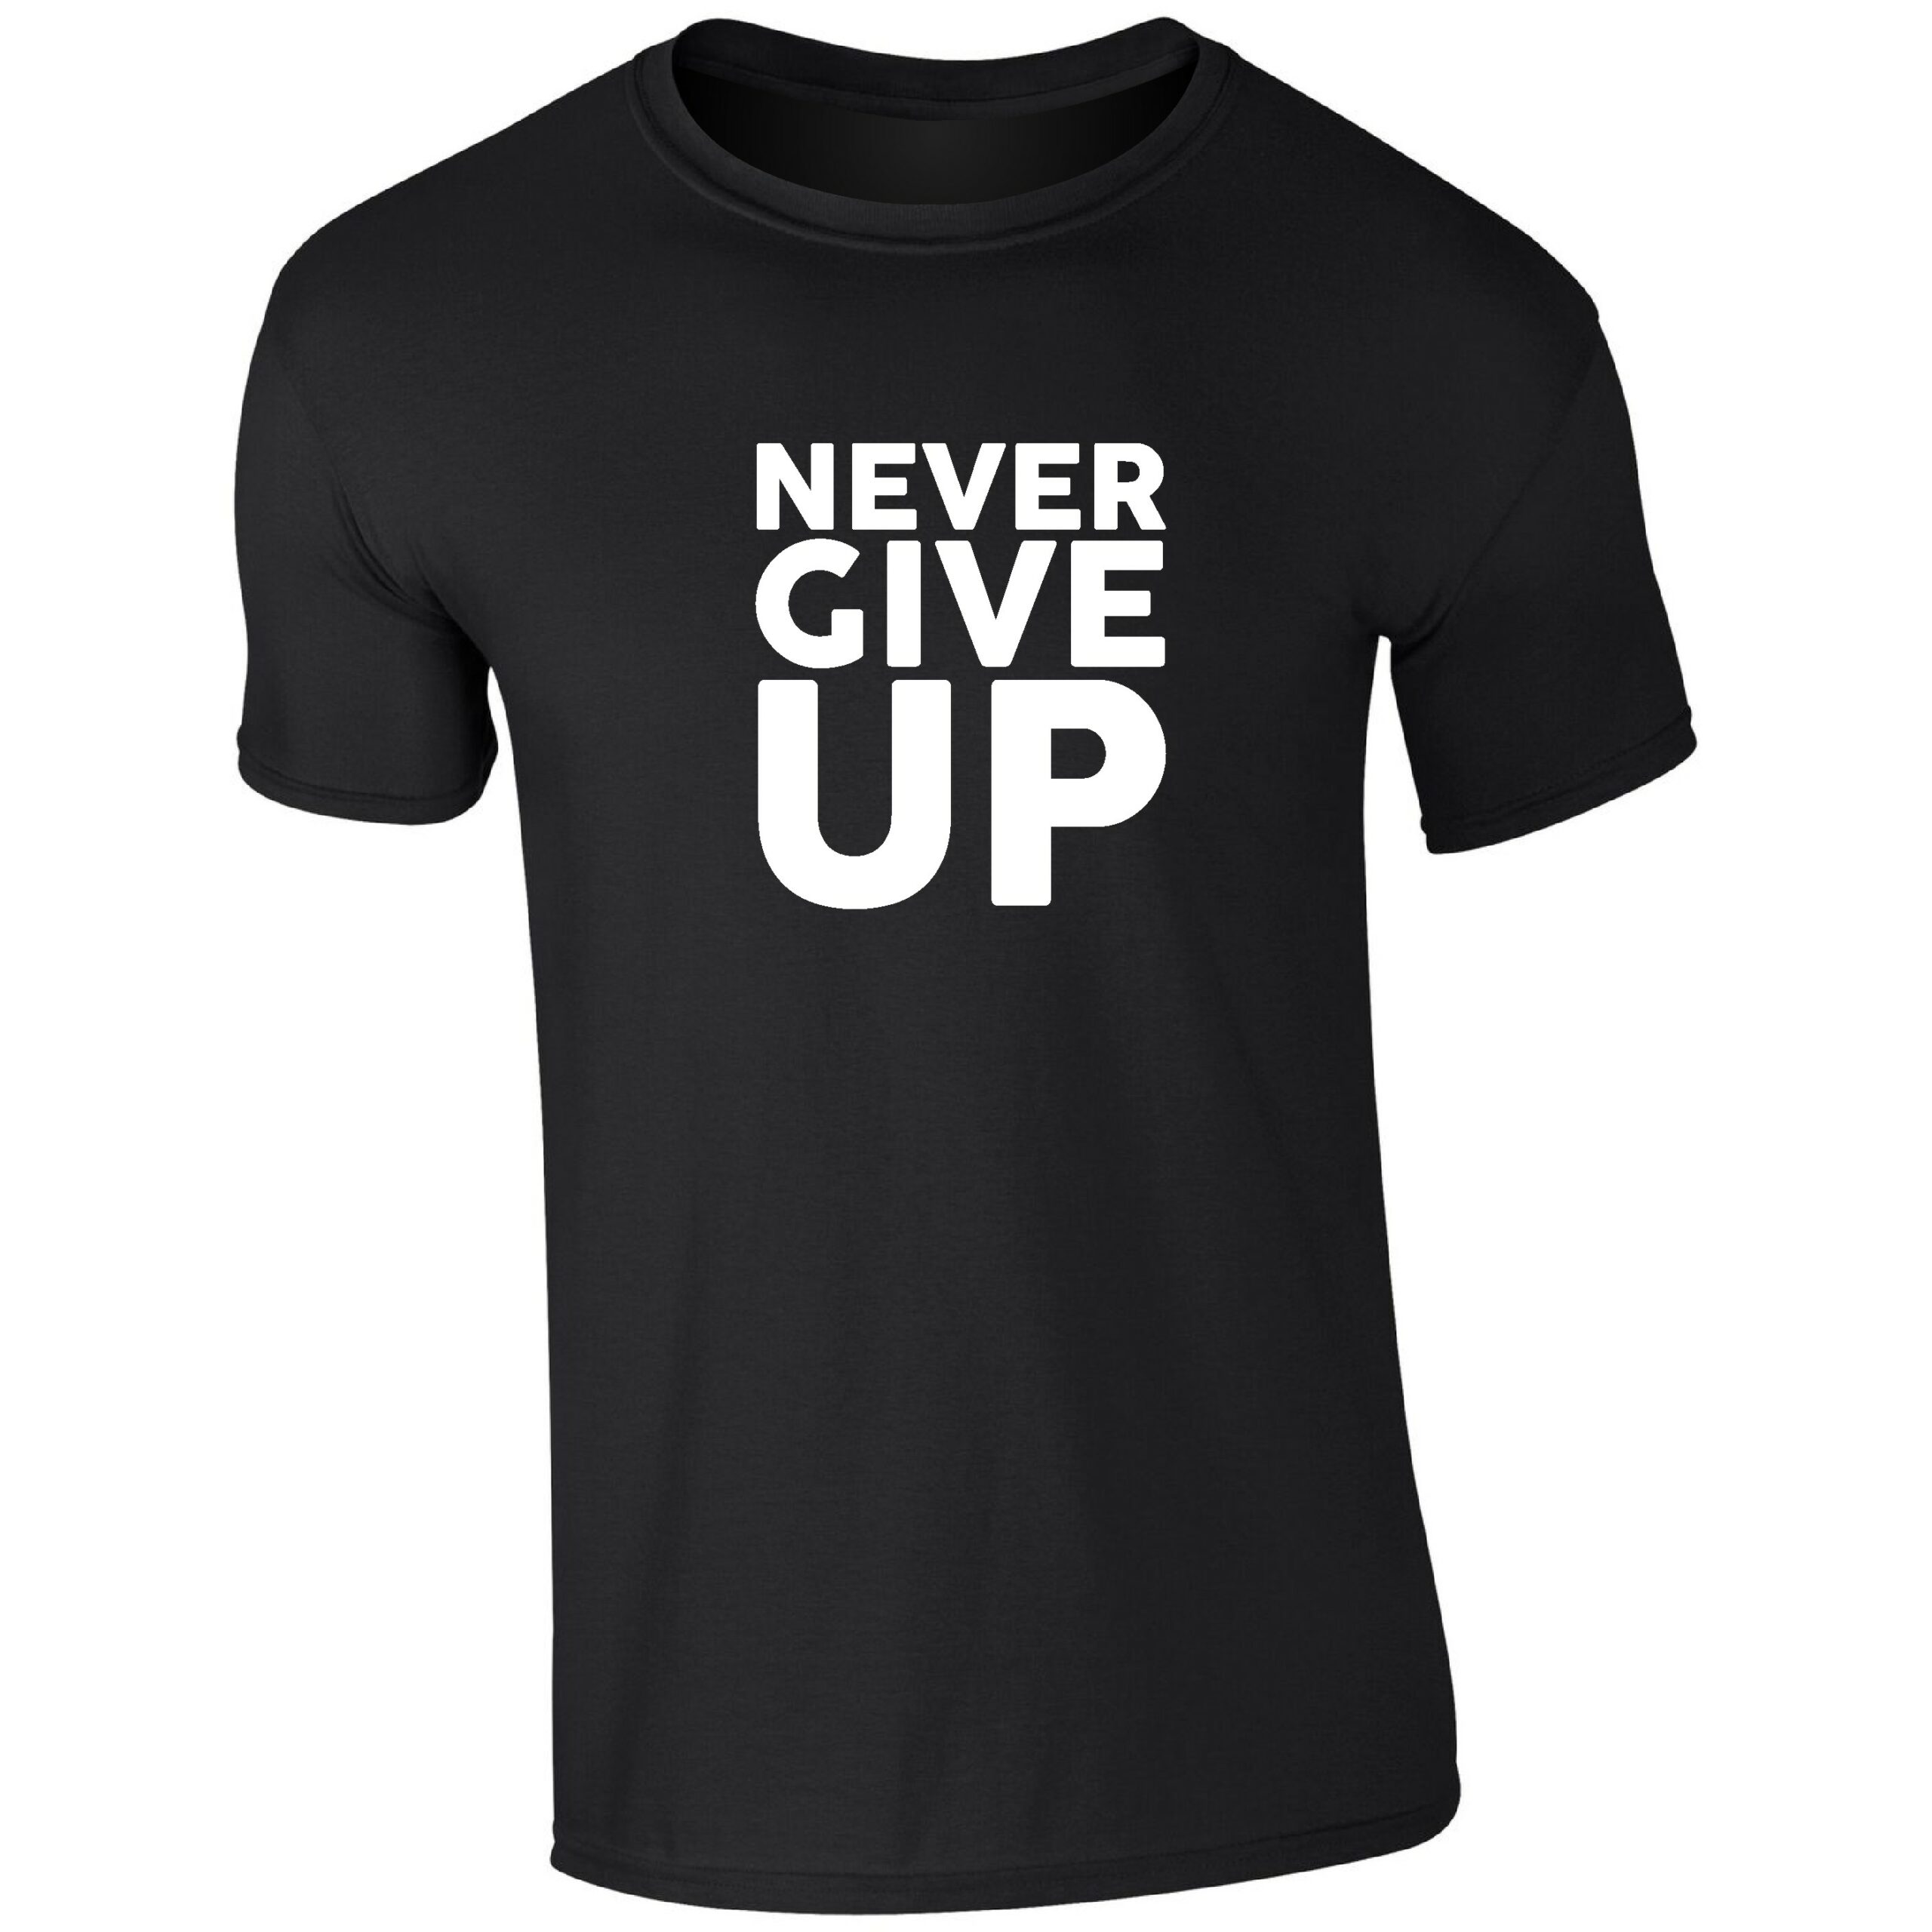 Never Give Up T-Shirt - Teejac